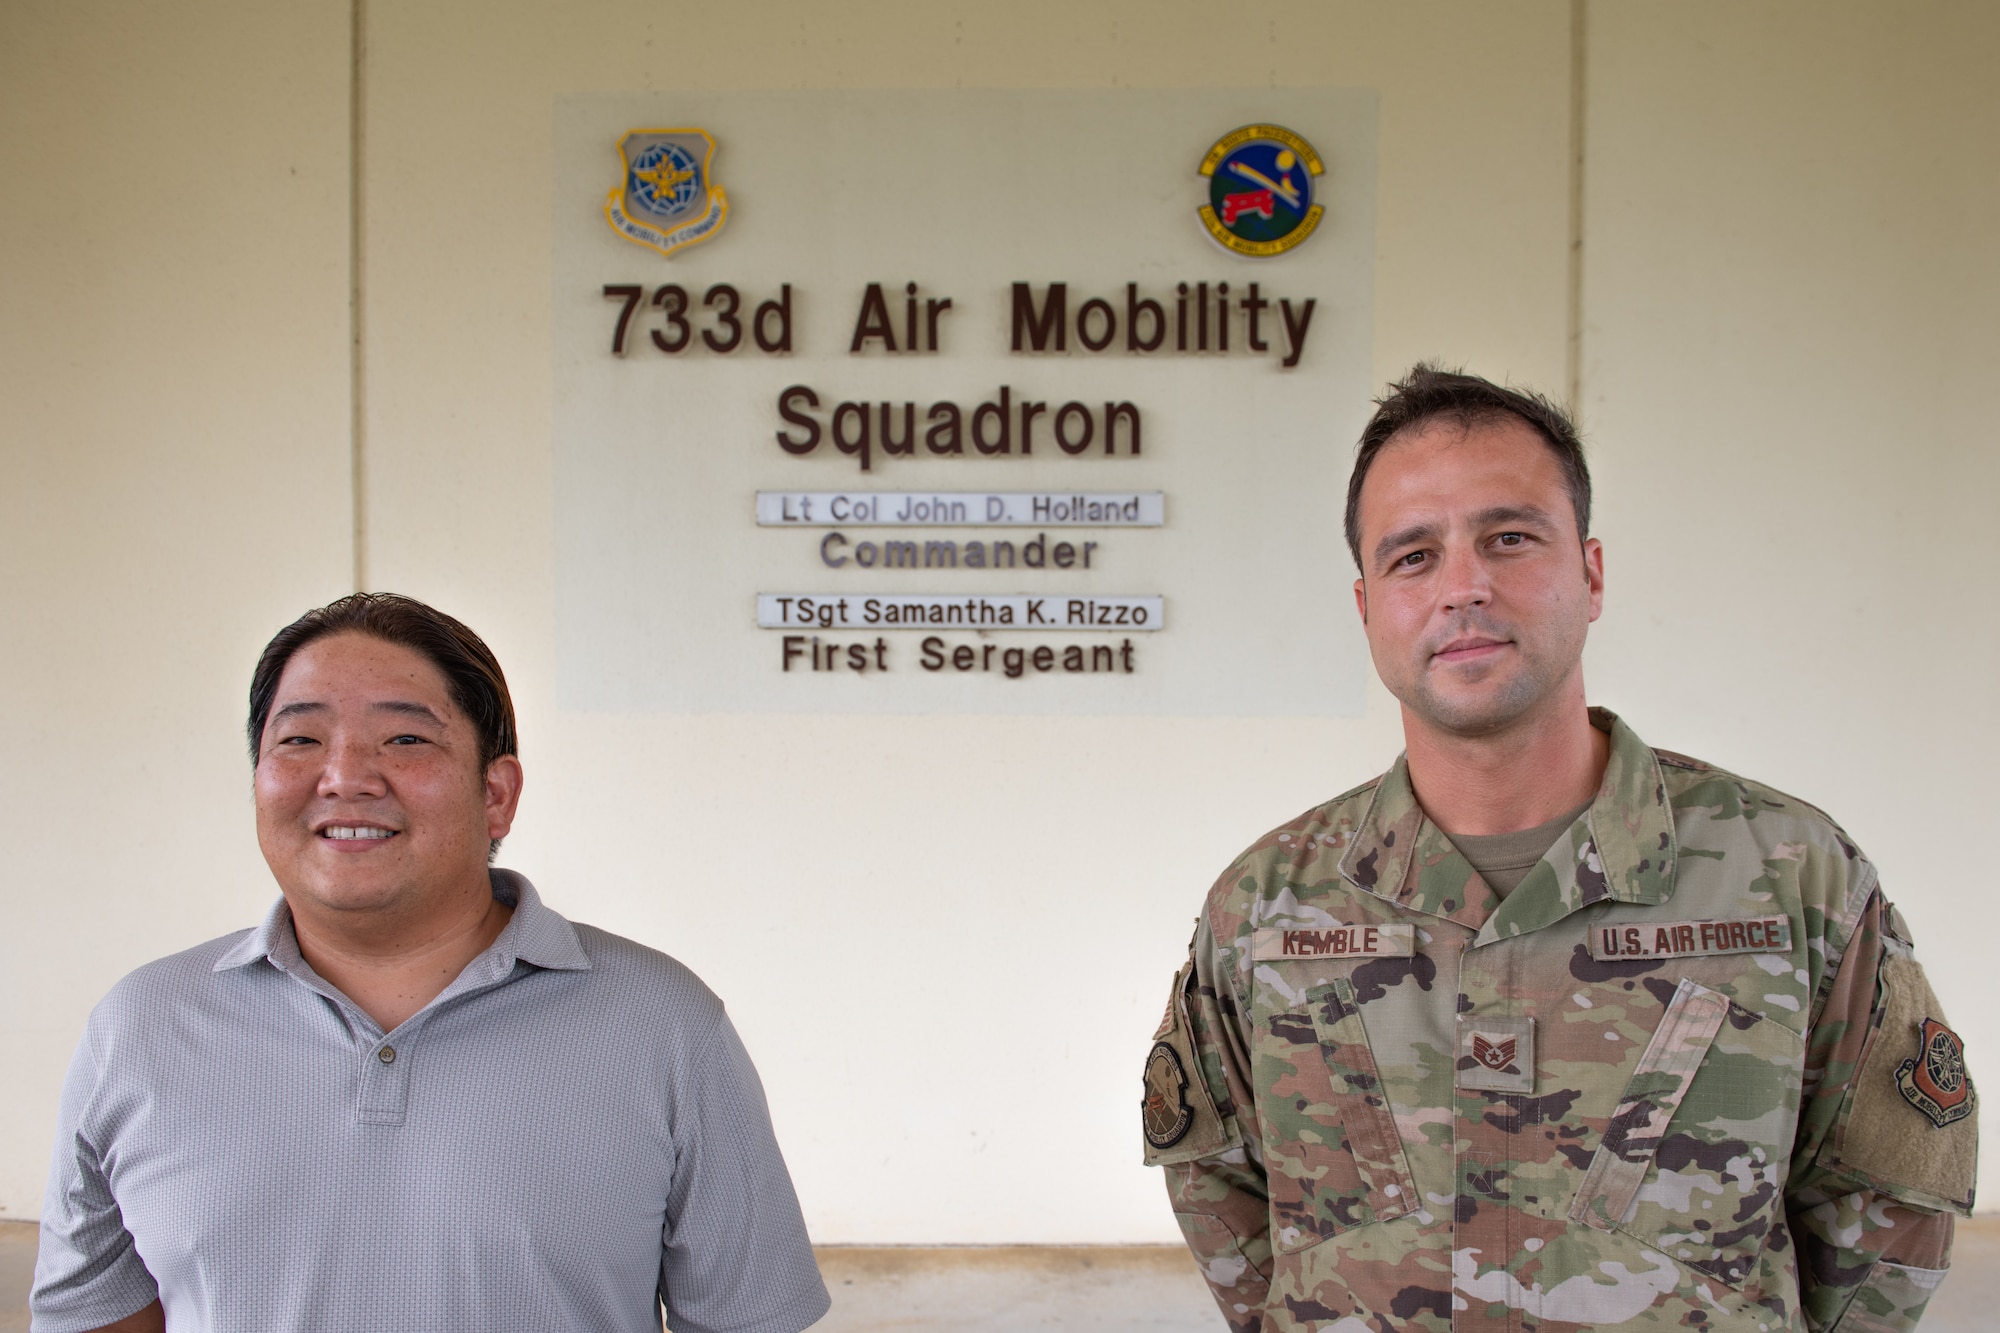 U.S. Air Force GS-11 employee Brandon Yoneda, air terminal operations duty officer, and U.S. Air Force Staff Sgt. Kyle Kemble, asset evaluator, both with the 733rd Air Mobility Squadron, pose for a photo at Kadena Air Base, Japan, Aug. 5, 2021.